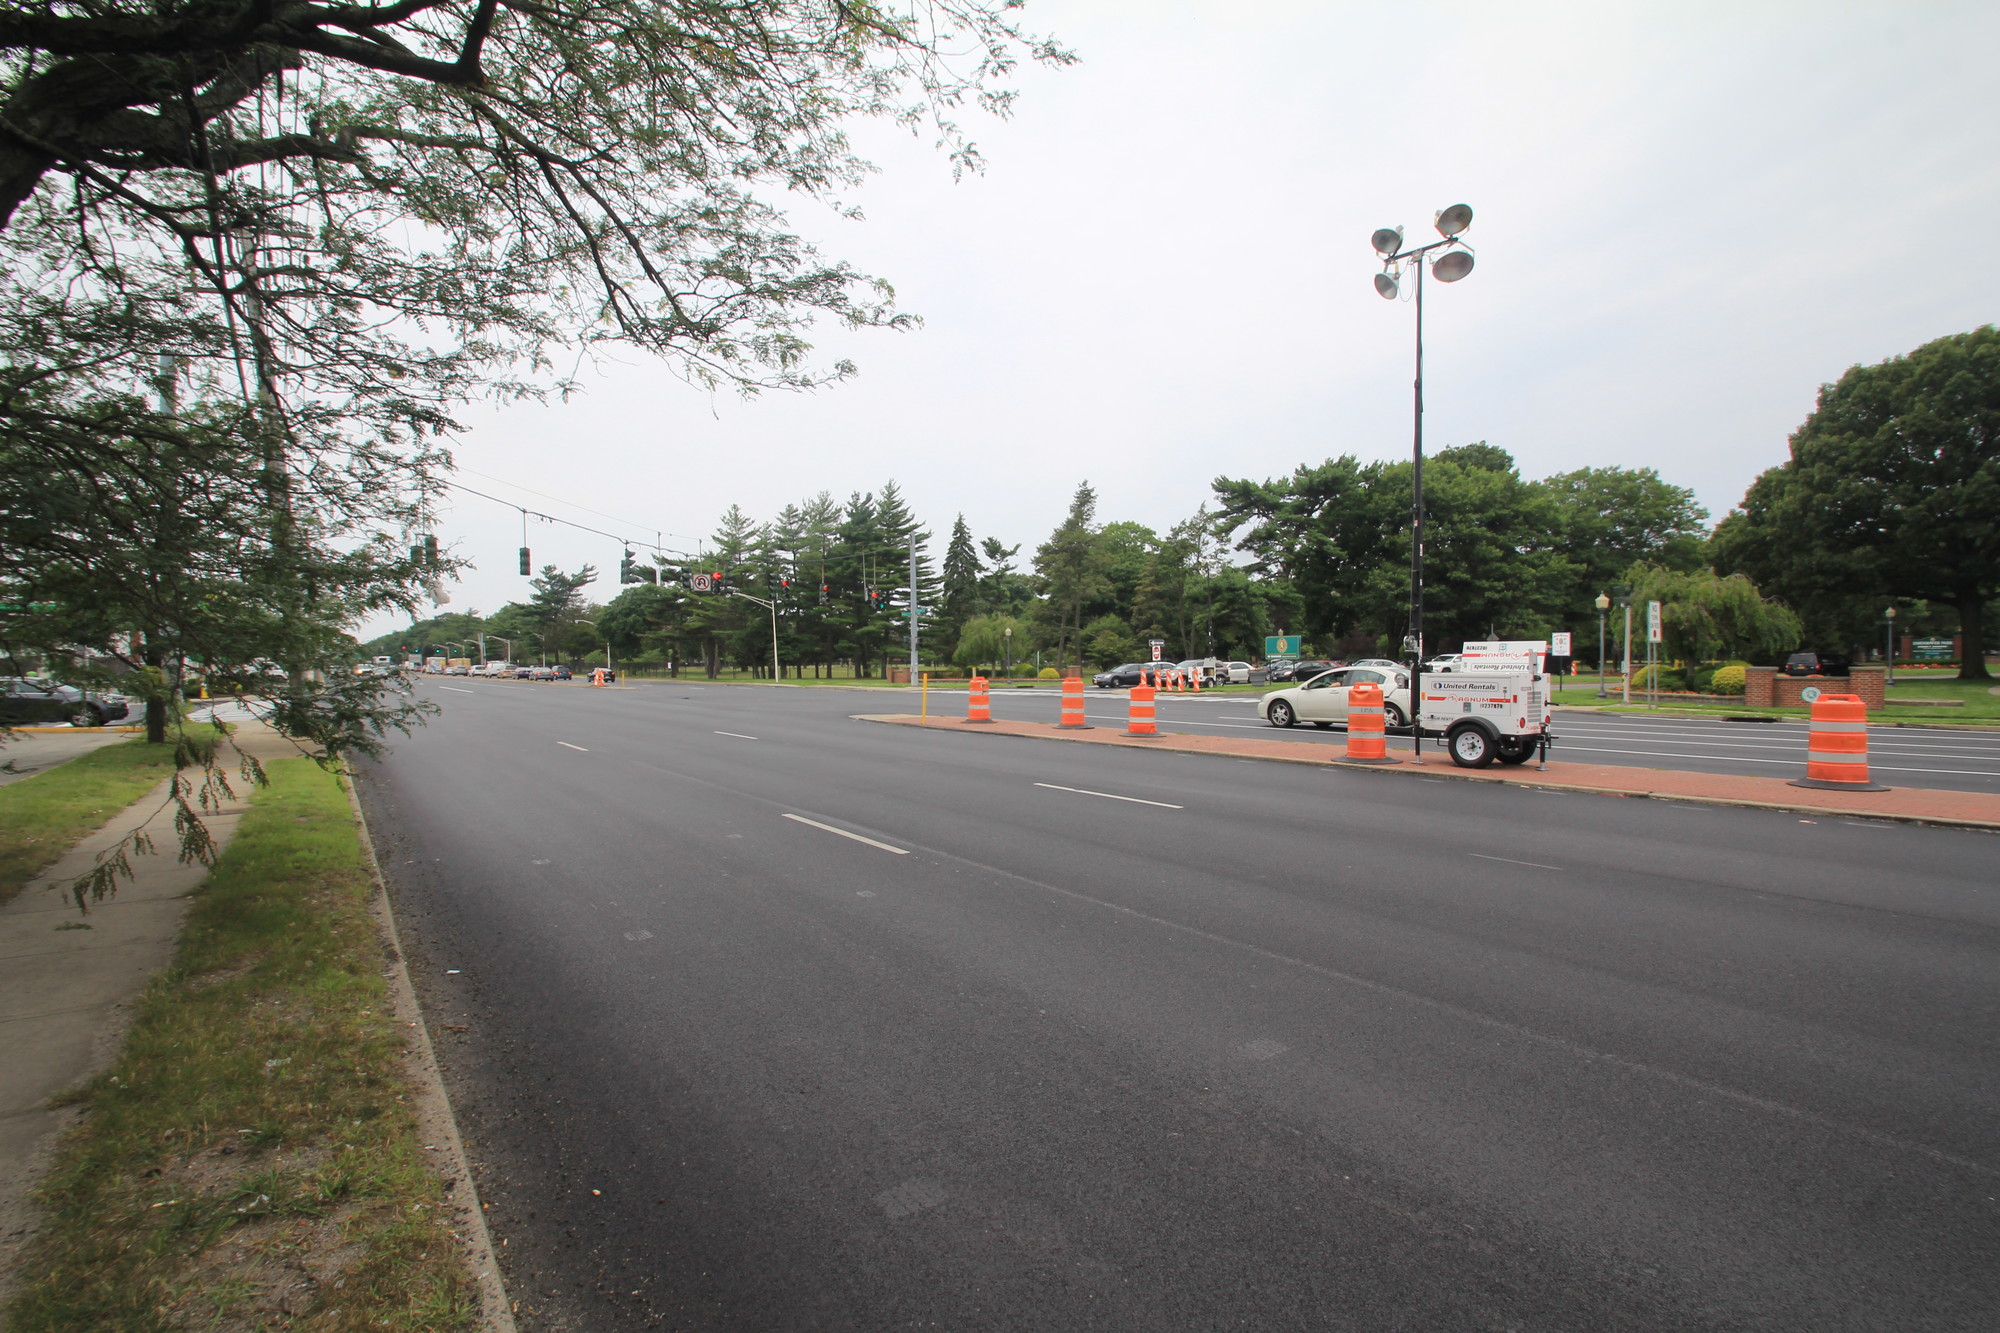 The East Meadow section of Hempstead Turnpike is expected to be fully repaved within two weeks, according to a Department of Transportation spokeswoman. Above, a completed eastbound section near the intersection with East Meadow Avenue.